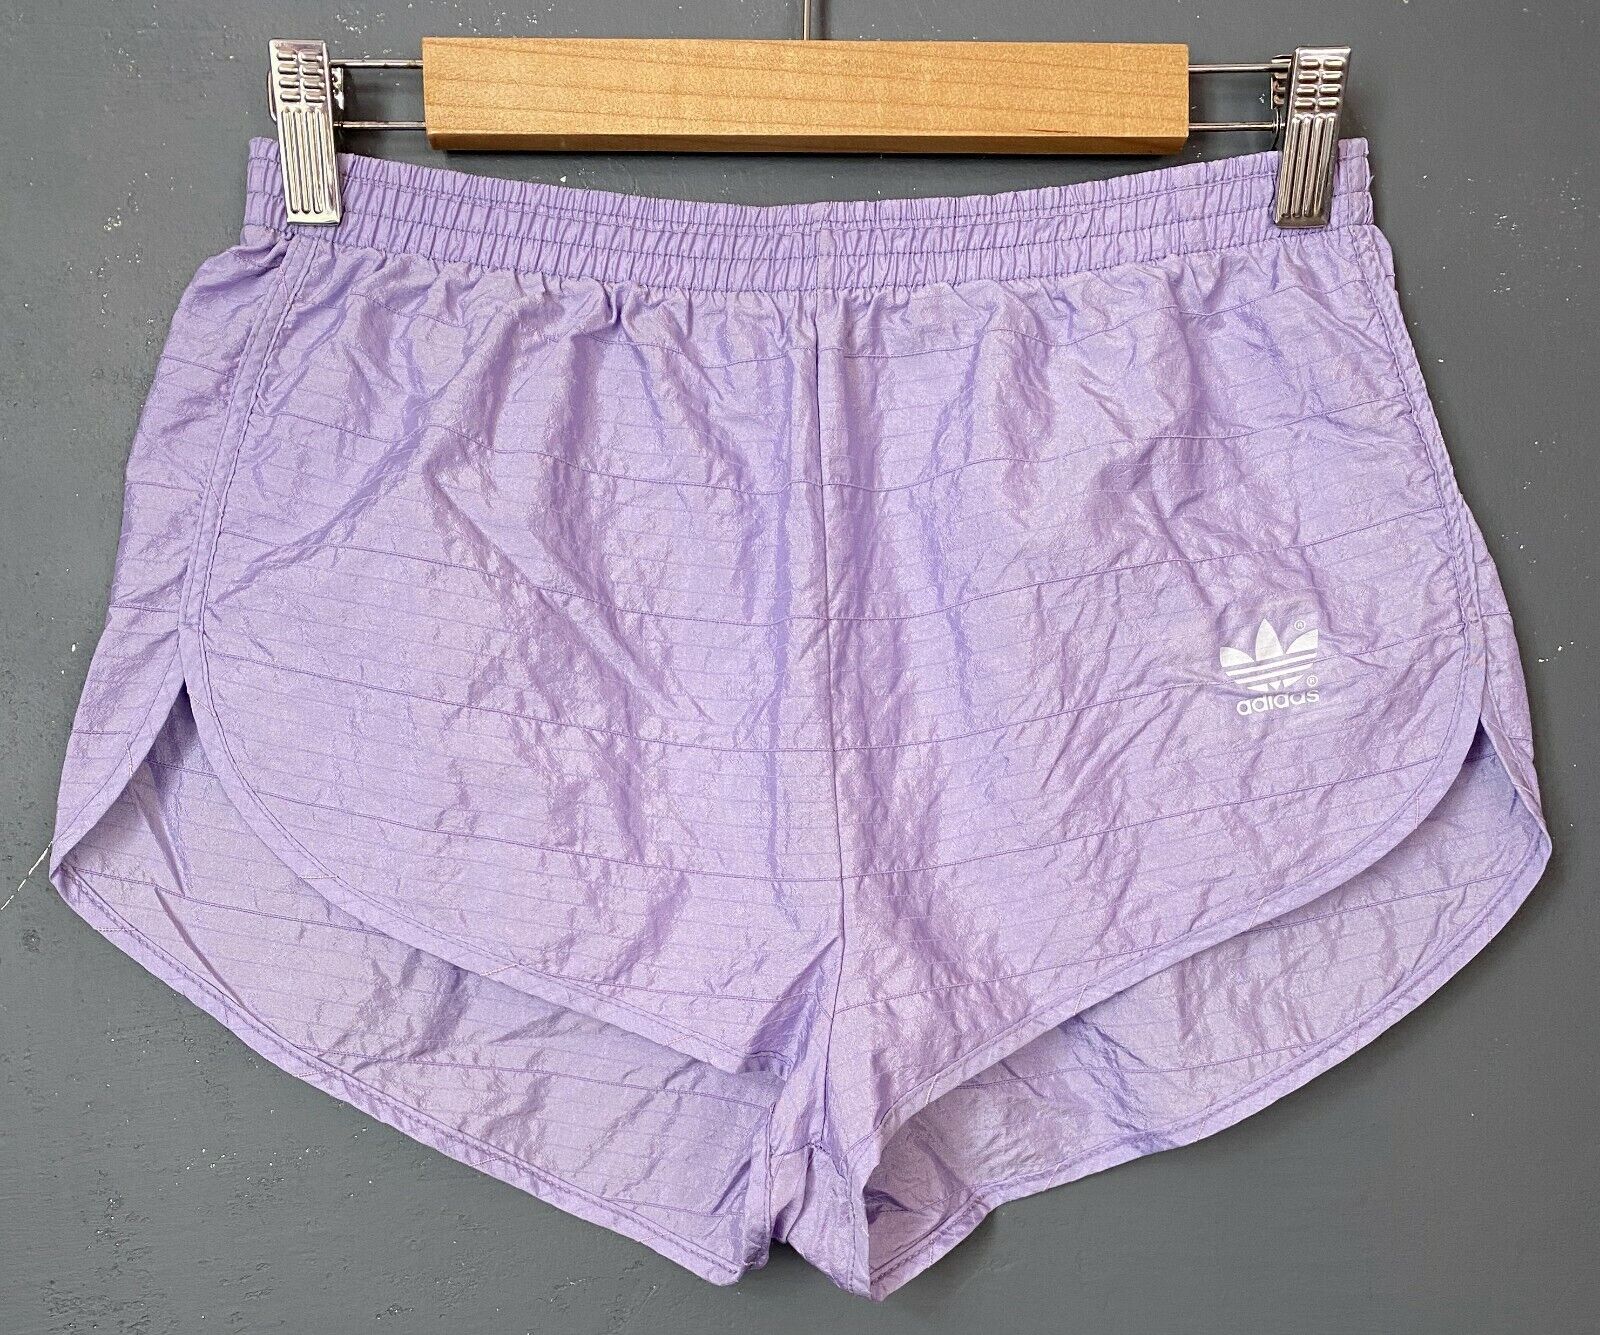 VINTAGE LADY WOMEN'S ADIDAS WEST PANTALONE SPRINT New life Outlet sale feature SHORTS GERMANY